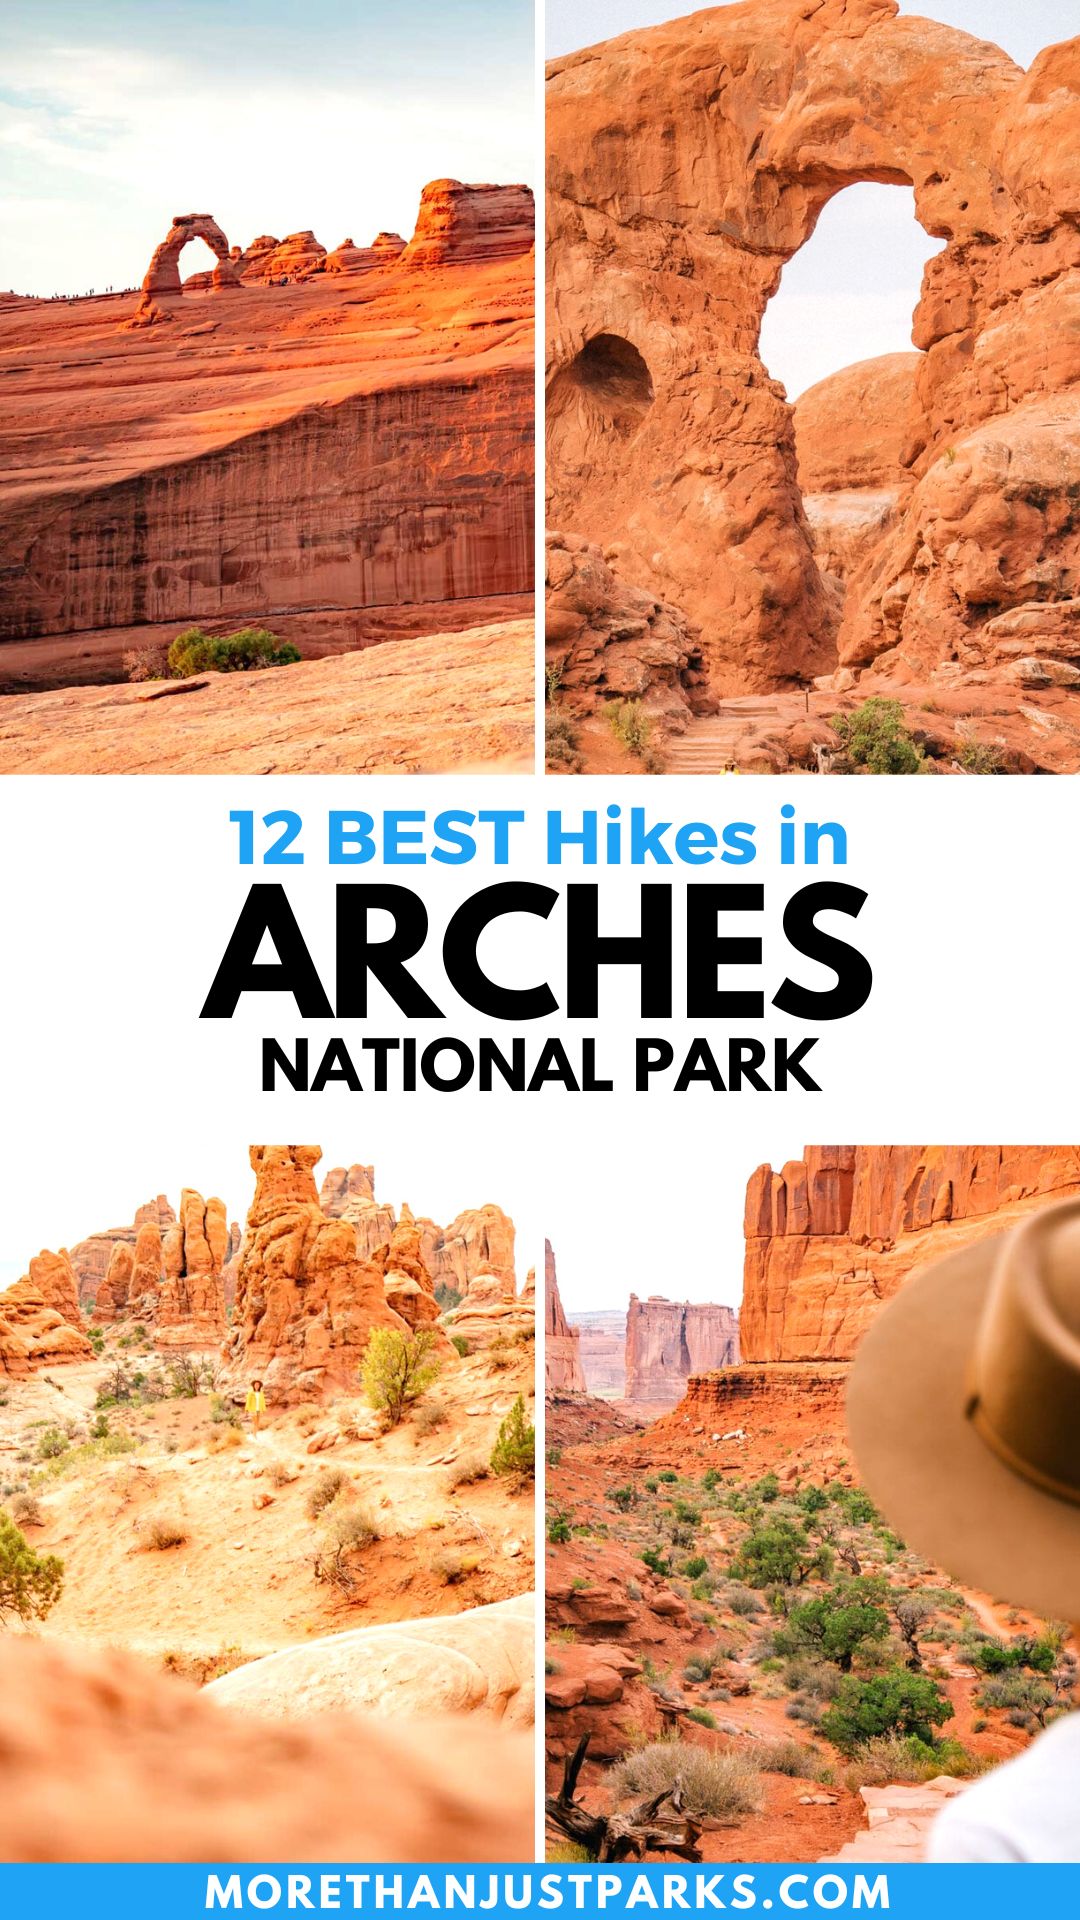 best hikes in arches national park, hiking in arches national park